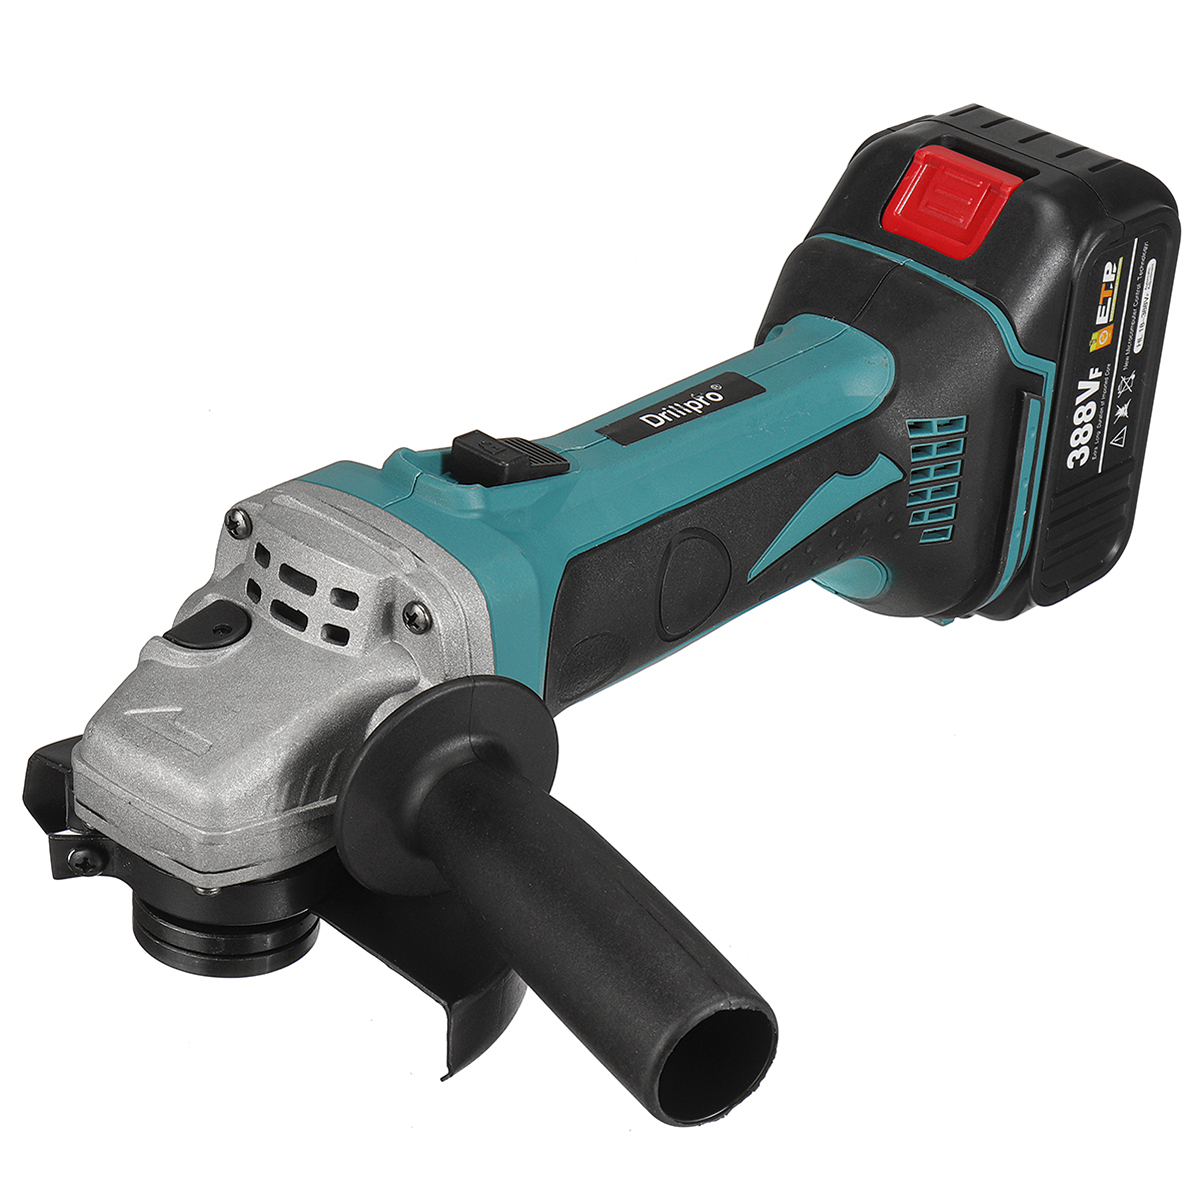 Drillpro-388VF-125mm-BlueBalck-Brushless-Motor-8500rpm-800W-Compact-Lithium-Electric-Polisher-1962696-7